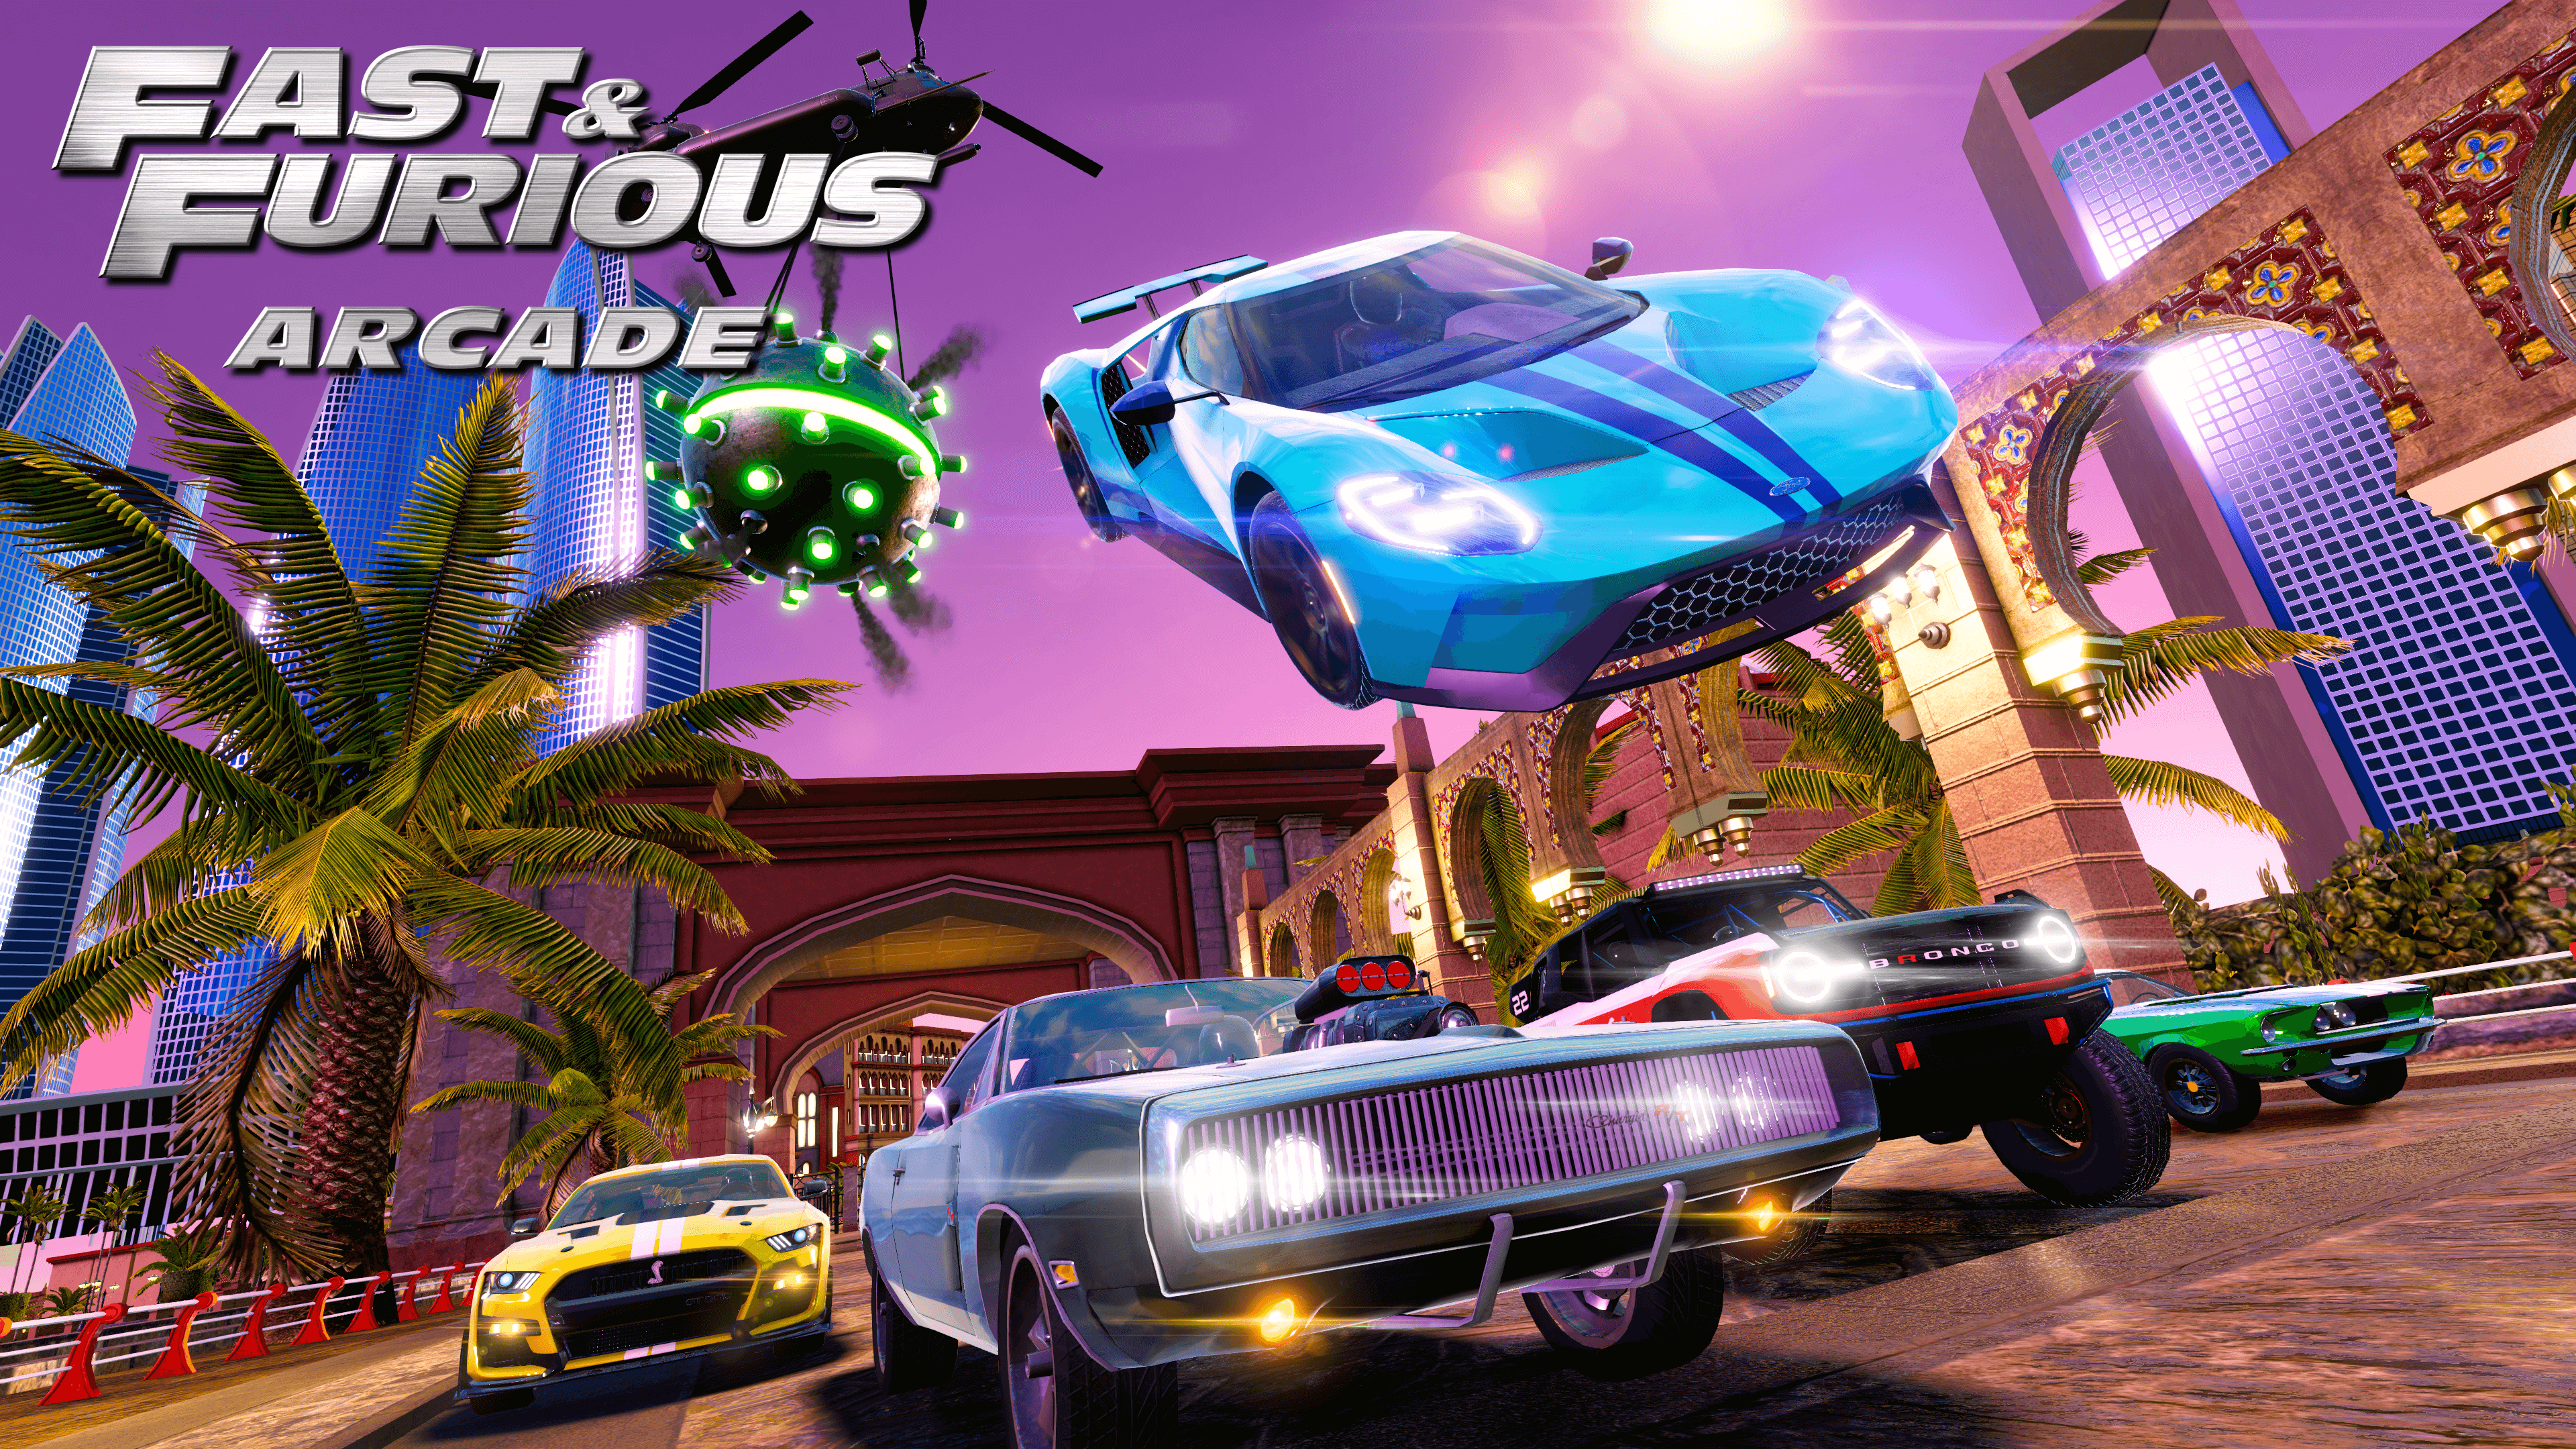 Arcade Heroes More Details Unveiled On Raw Thrills' Fast & Furious Arcade -  Arcade Heroes